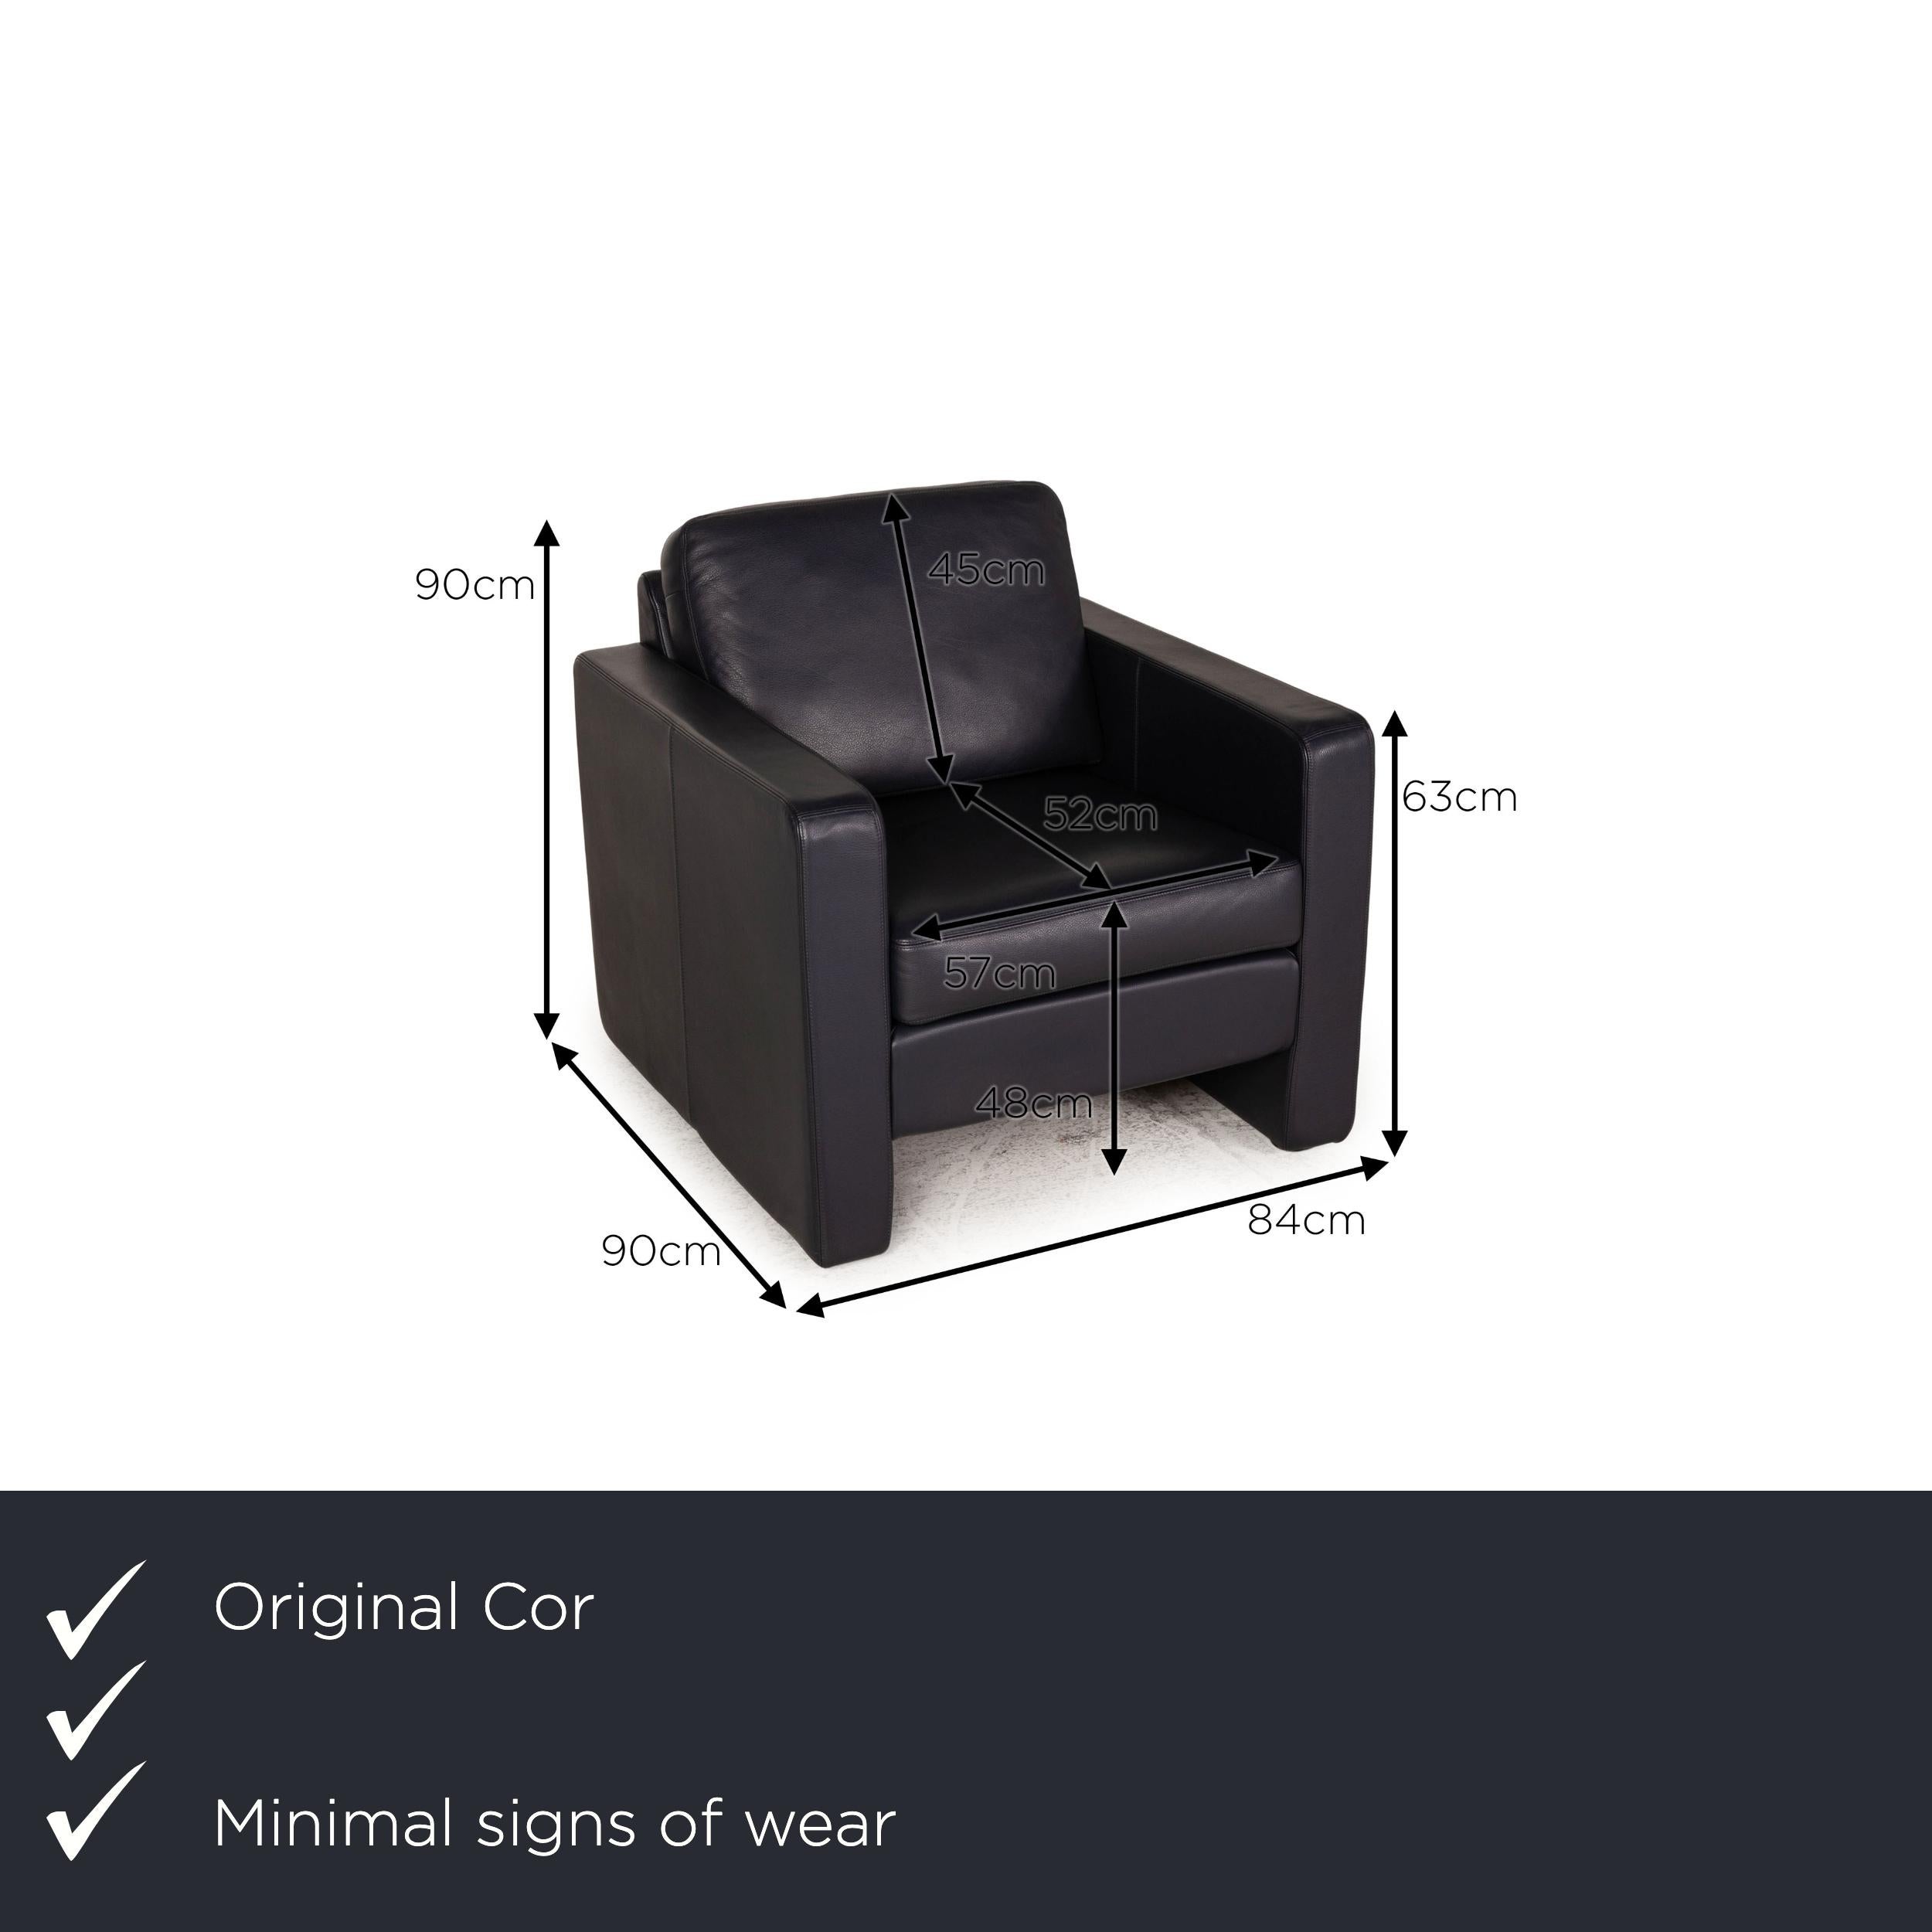 We present to you a Cor Conseta leather armchair blue.

Product measurements in centimeters:

depth: 90
width: 84
height: 85
seat height: 48
rest height: 63
seat depth: 52
seat width: 57
back height: 45.

 